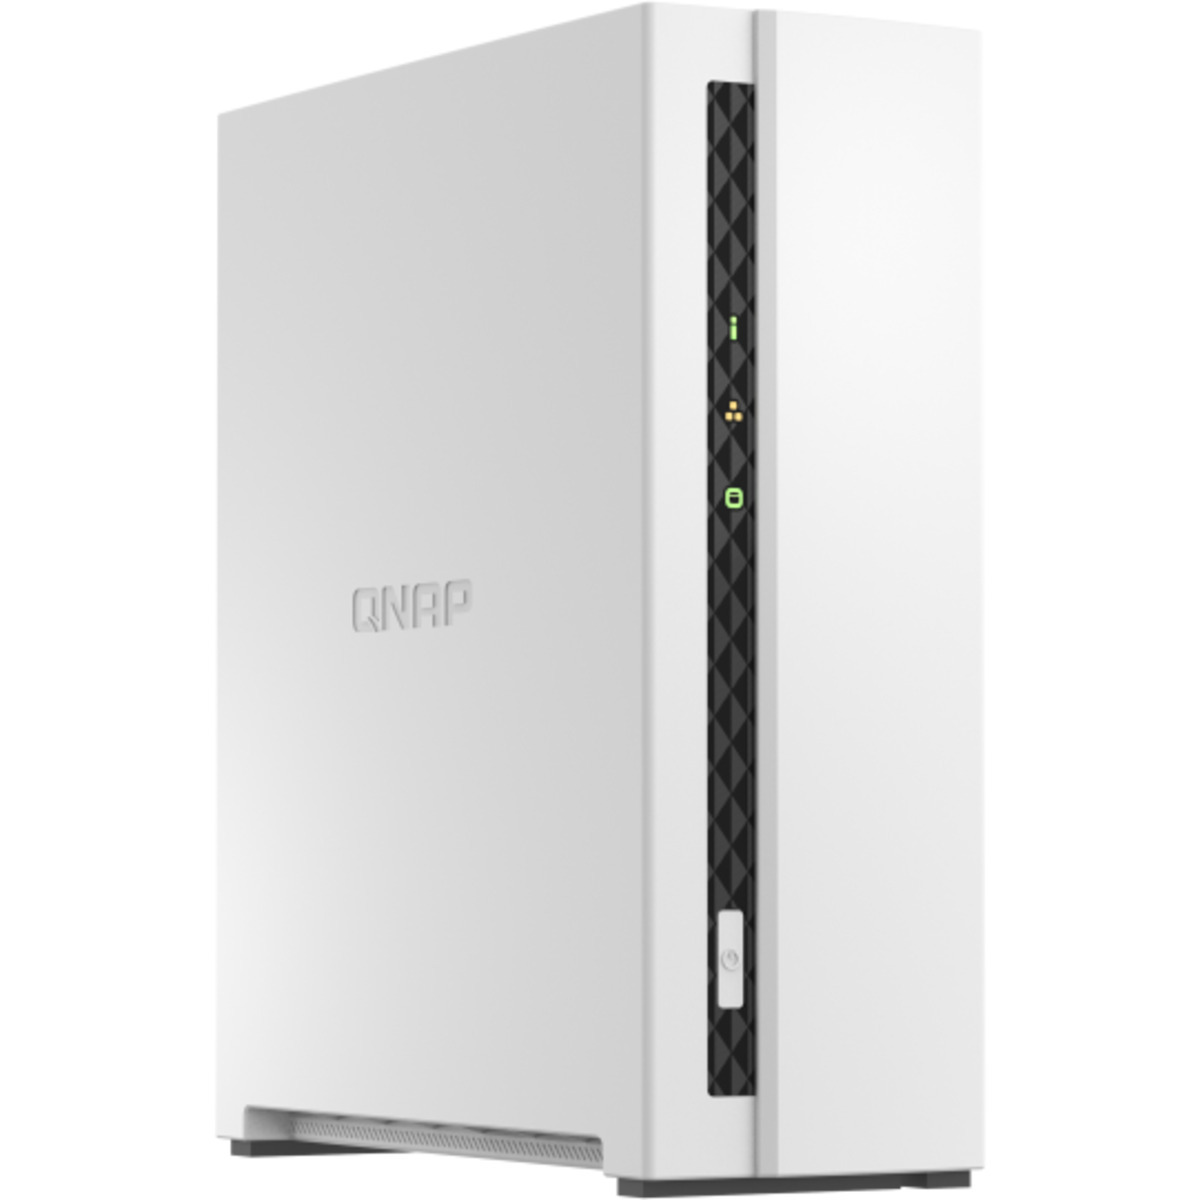 QNAP TS-133 16tb 1-Bay Desktop Personal / Basic Home / Small Office NAS - Network Attached Storage Device 1x16tb Seagate IronWolf Pro ST16000NT001 3.5 7200rpm SATA 6Gb/s HDD NAS Class Drives Installed - Burn-In Tested - ON SALE TS-133